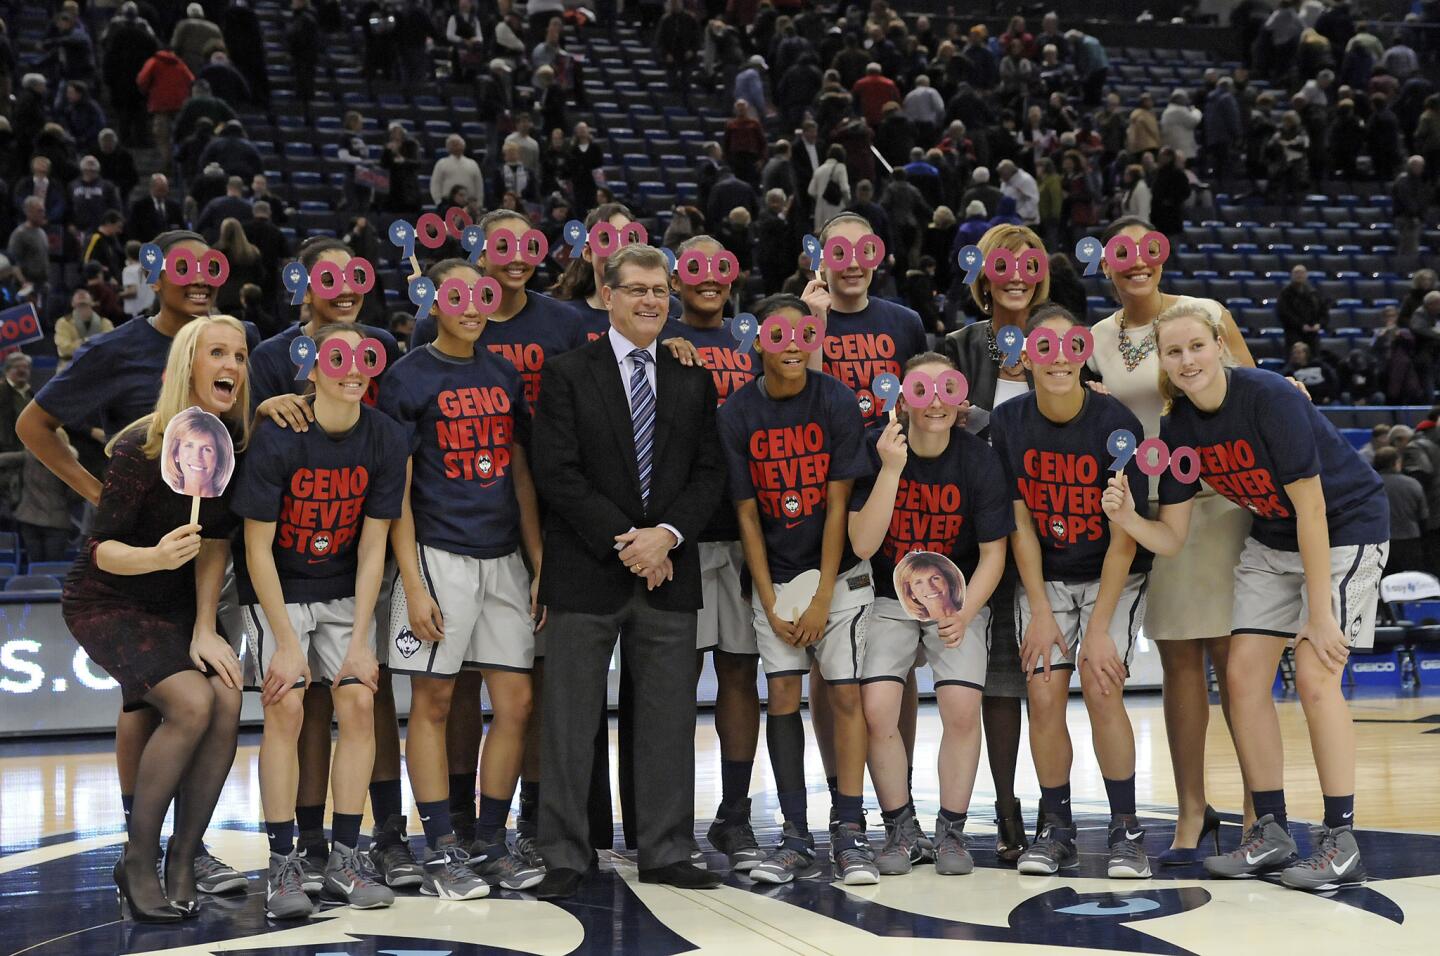 Connecticut Huskies head coach Geno Auriemma stands with his players and coaches after winning his 900th game, 96-36, against Cincinnati at the XL Center Tuesday night.